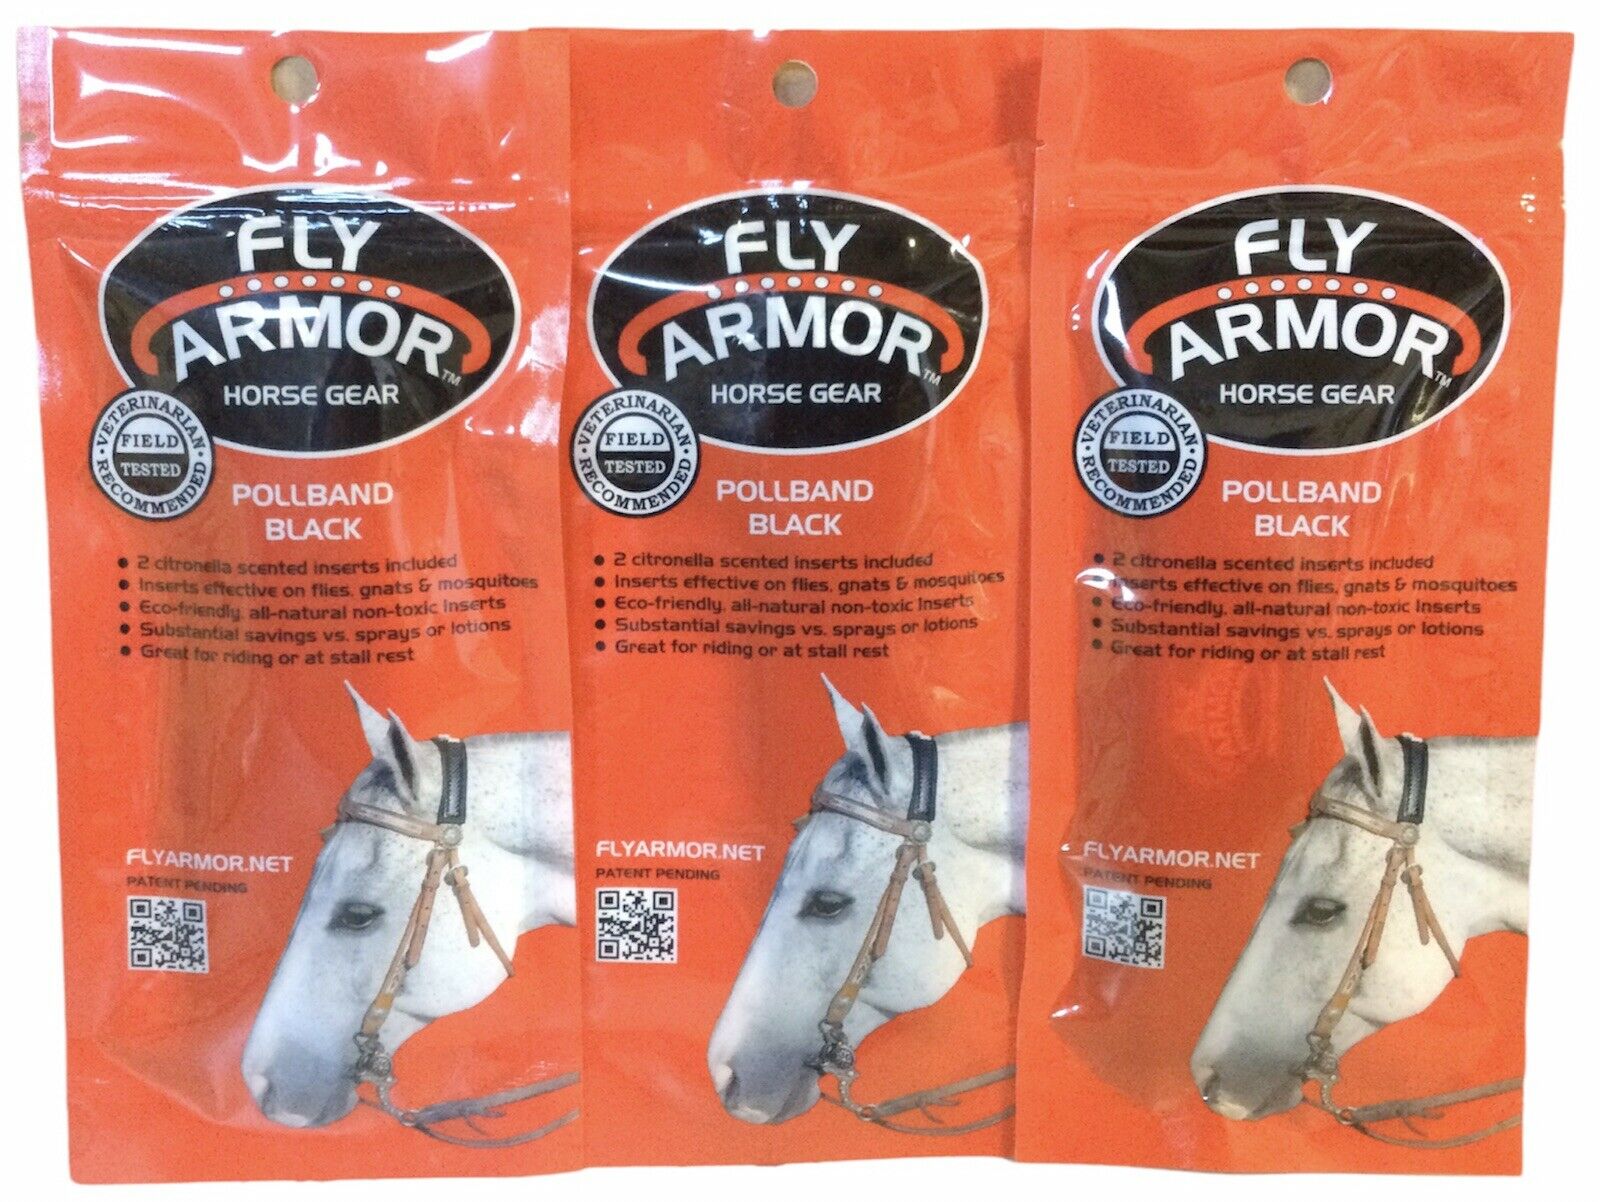 3 Pk Fly Armor Horse Gear Pollband Black Fly Repellent Bands 2 Inserts Per Pack